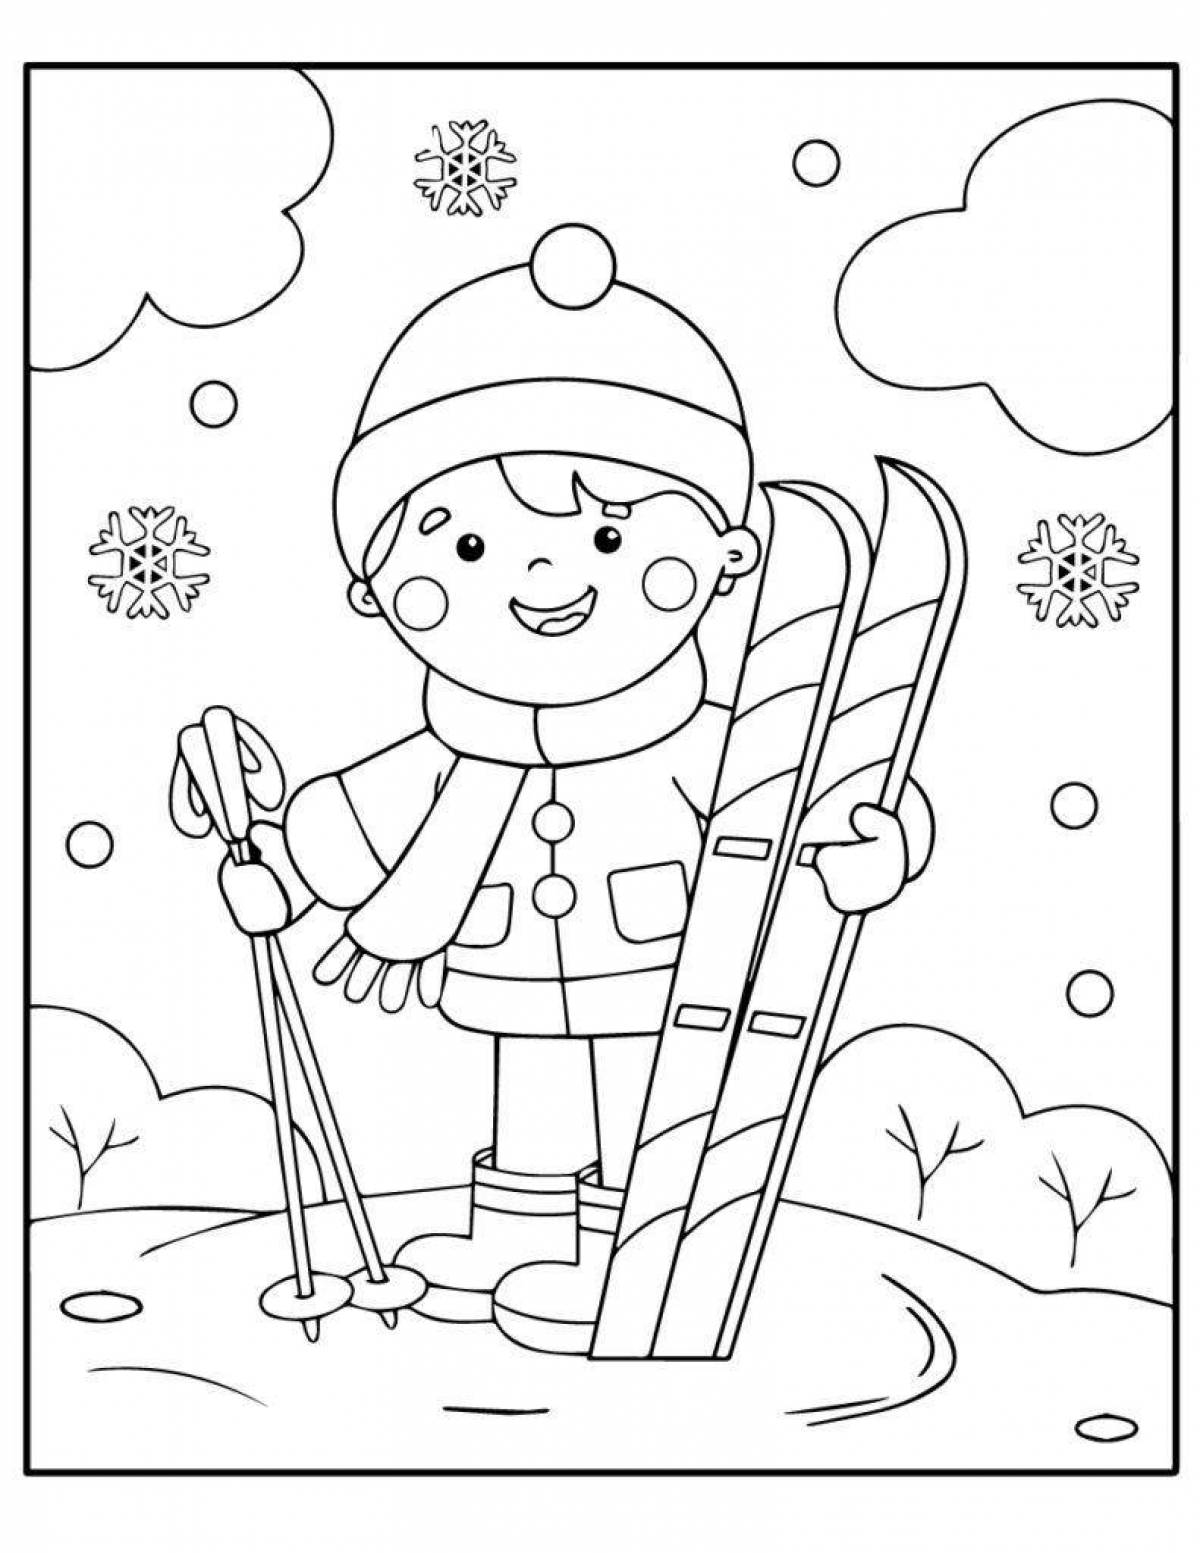 Radiant winter sport coloring book for children 6-7 years old